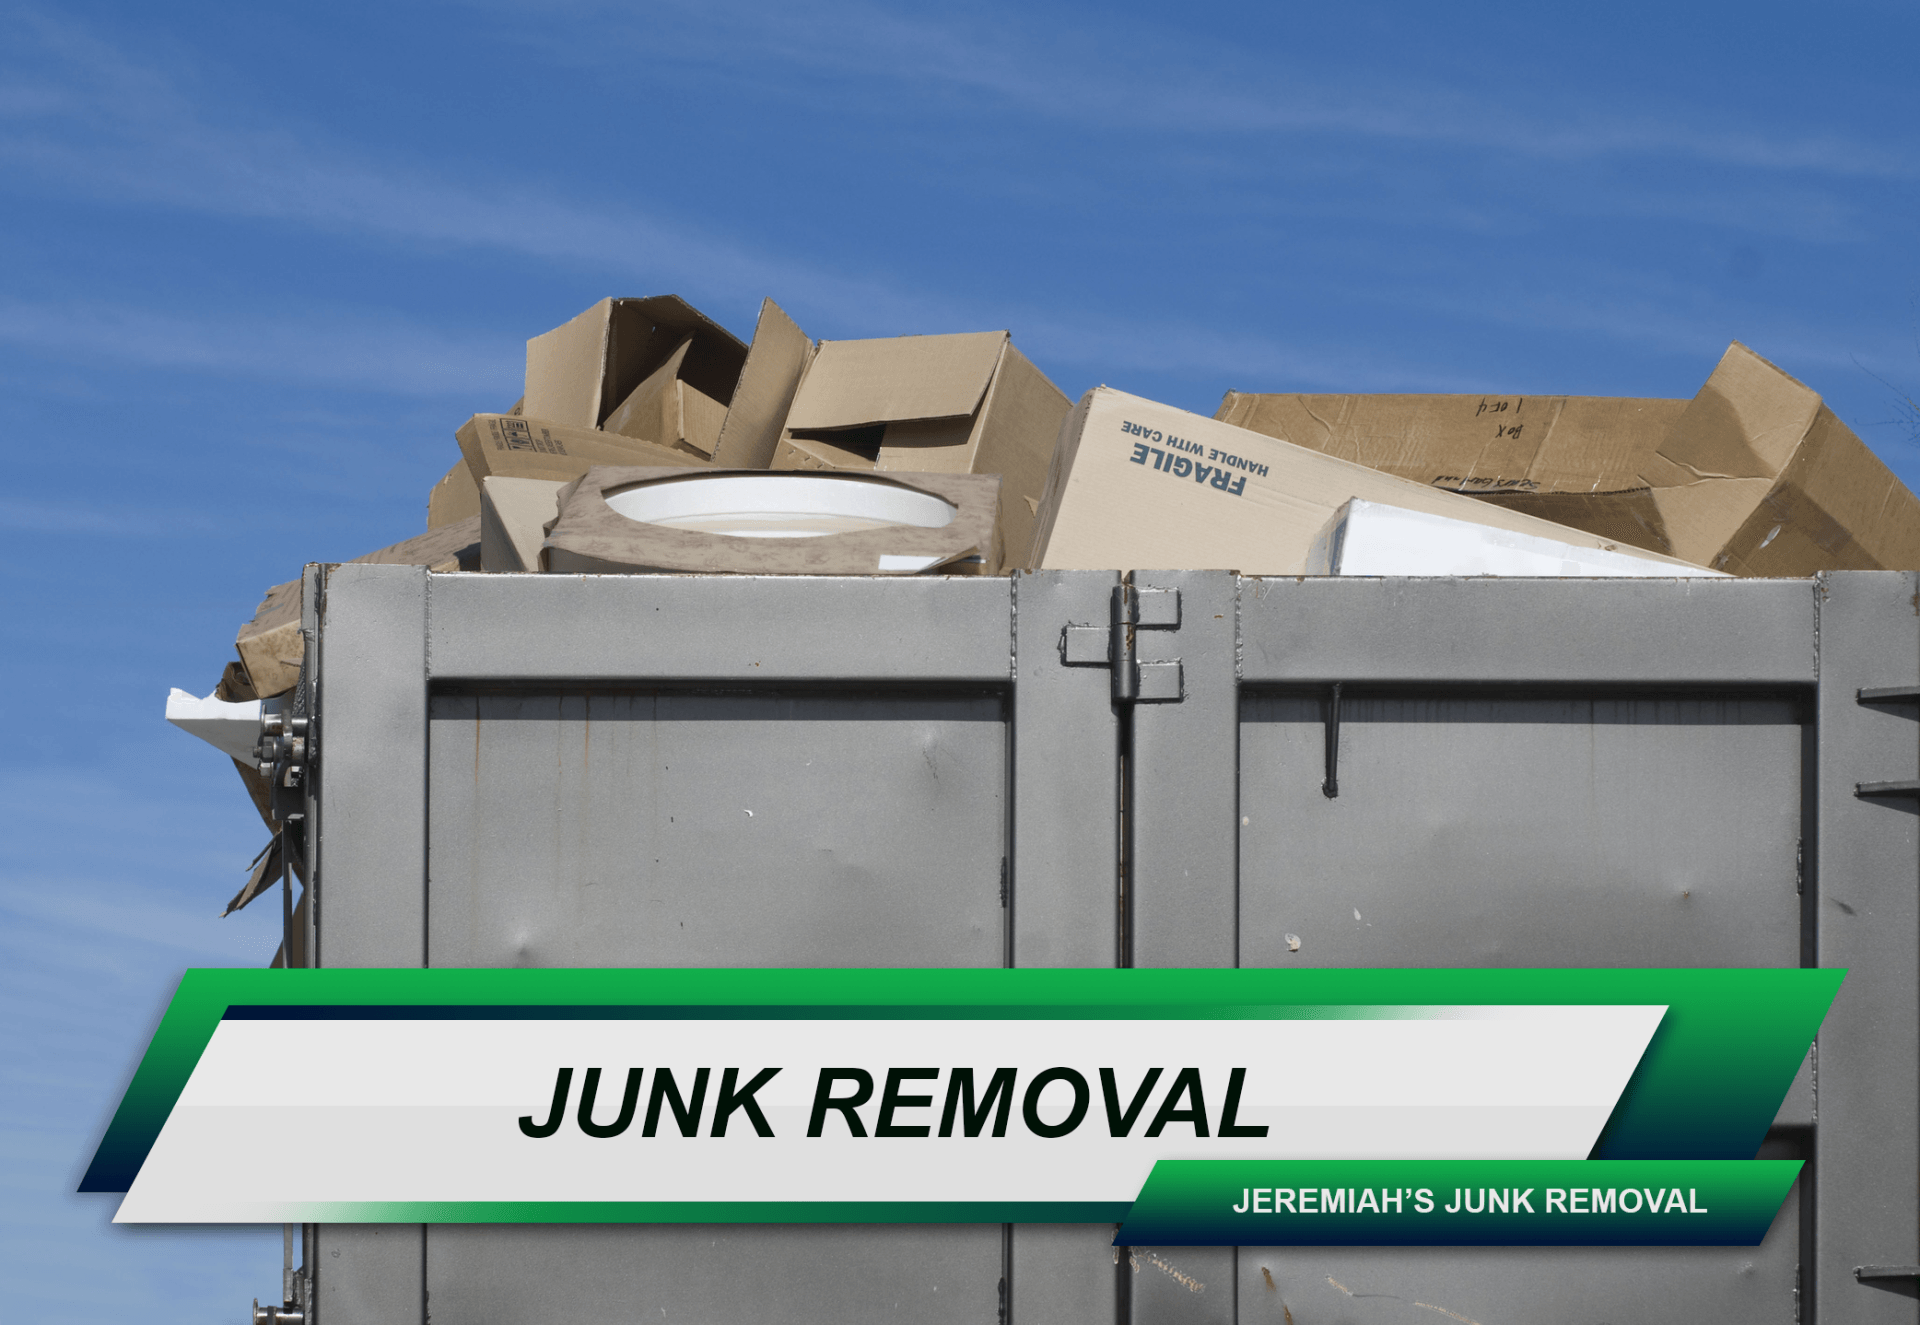 Junk Removal in Long Island, NY